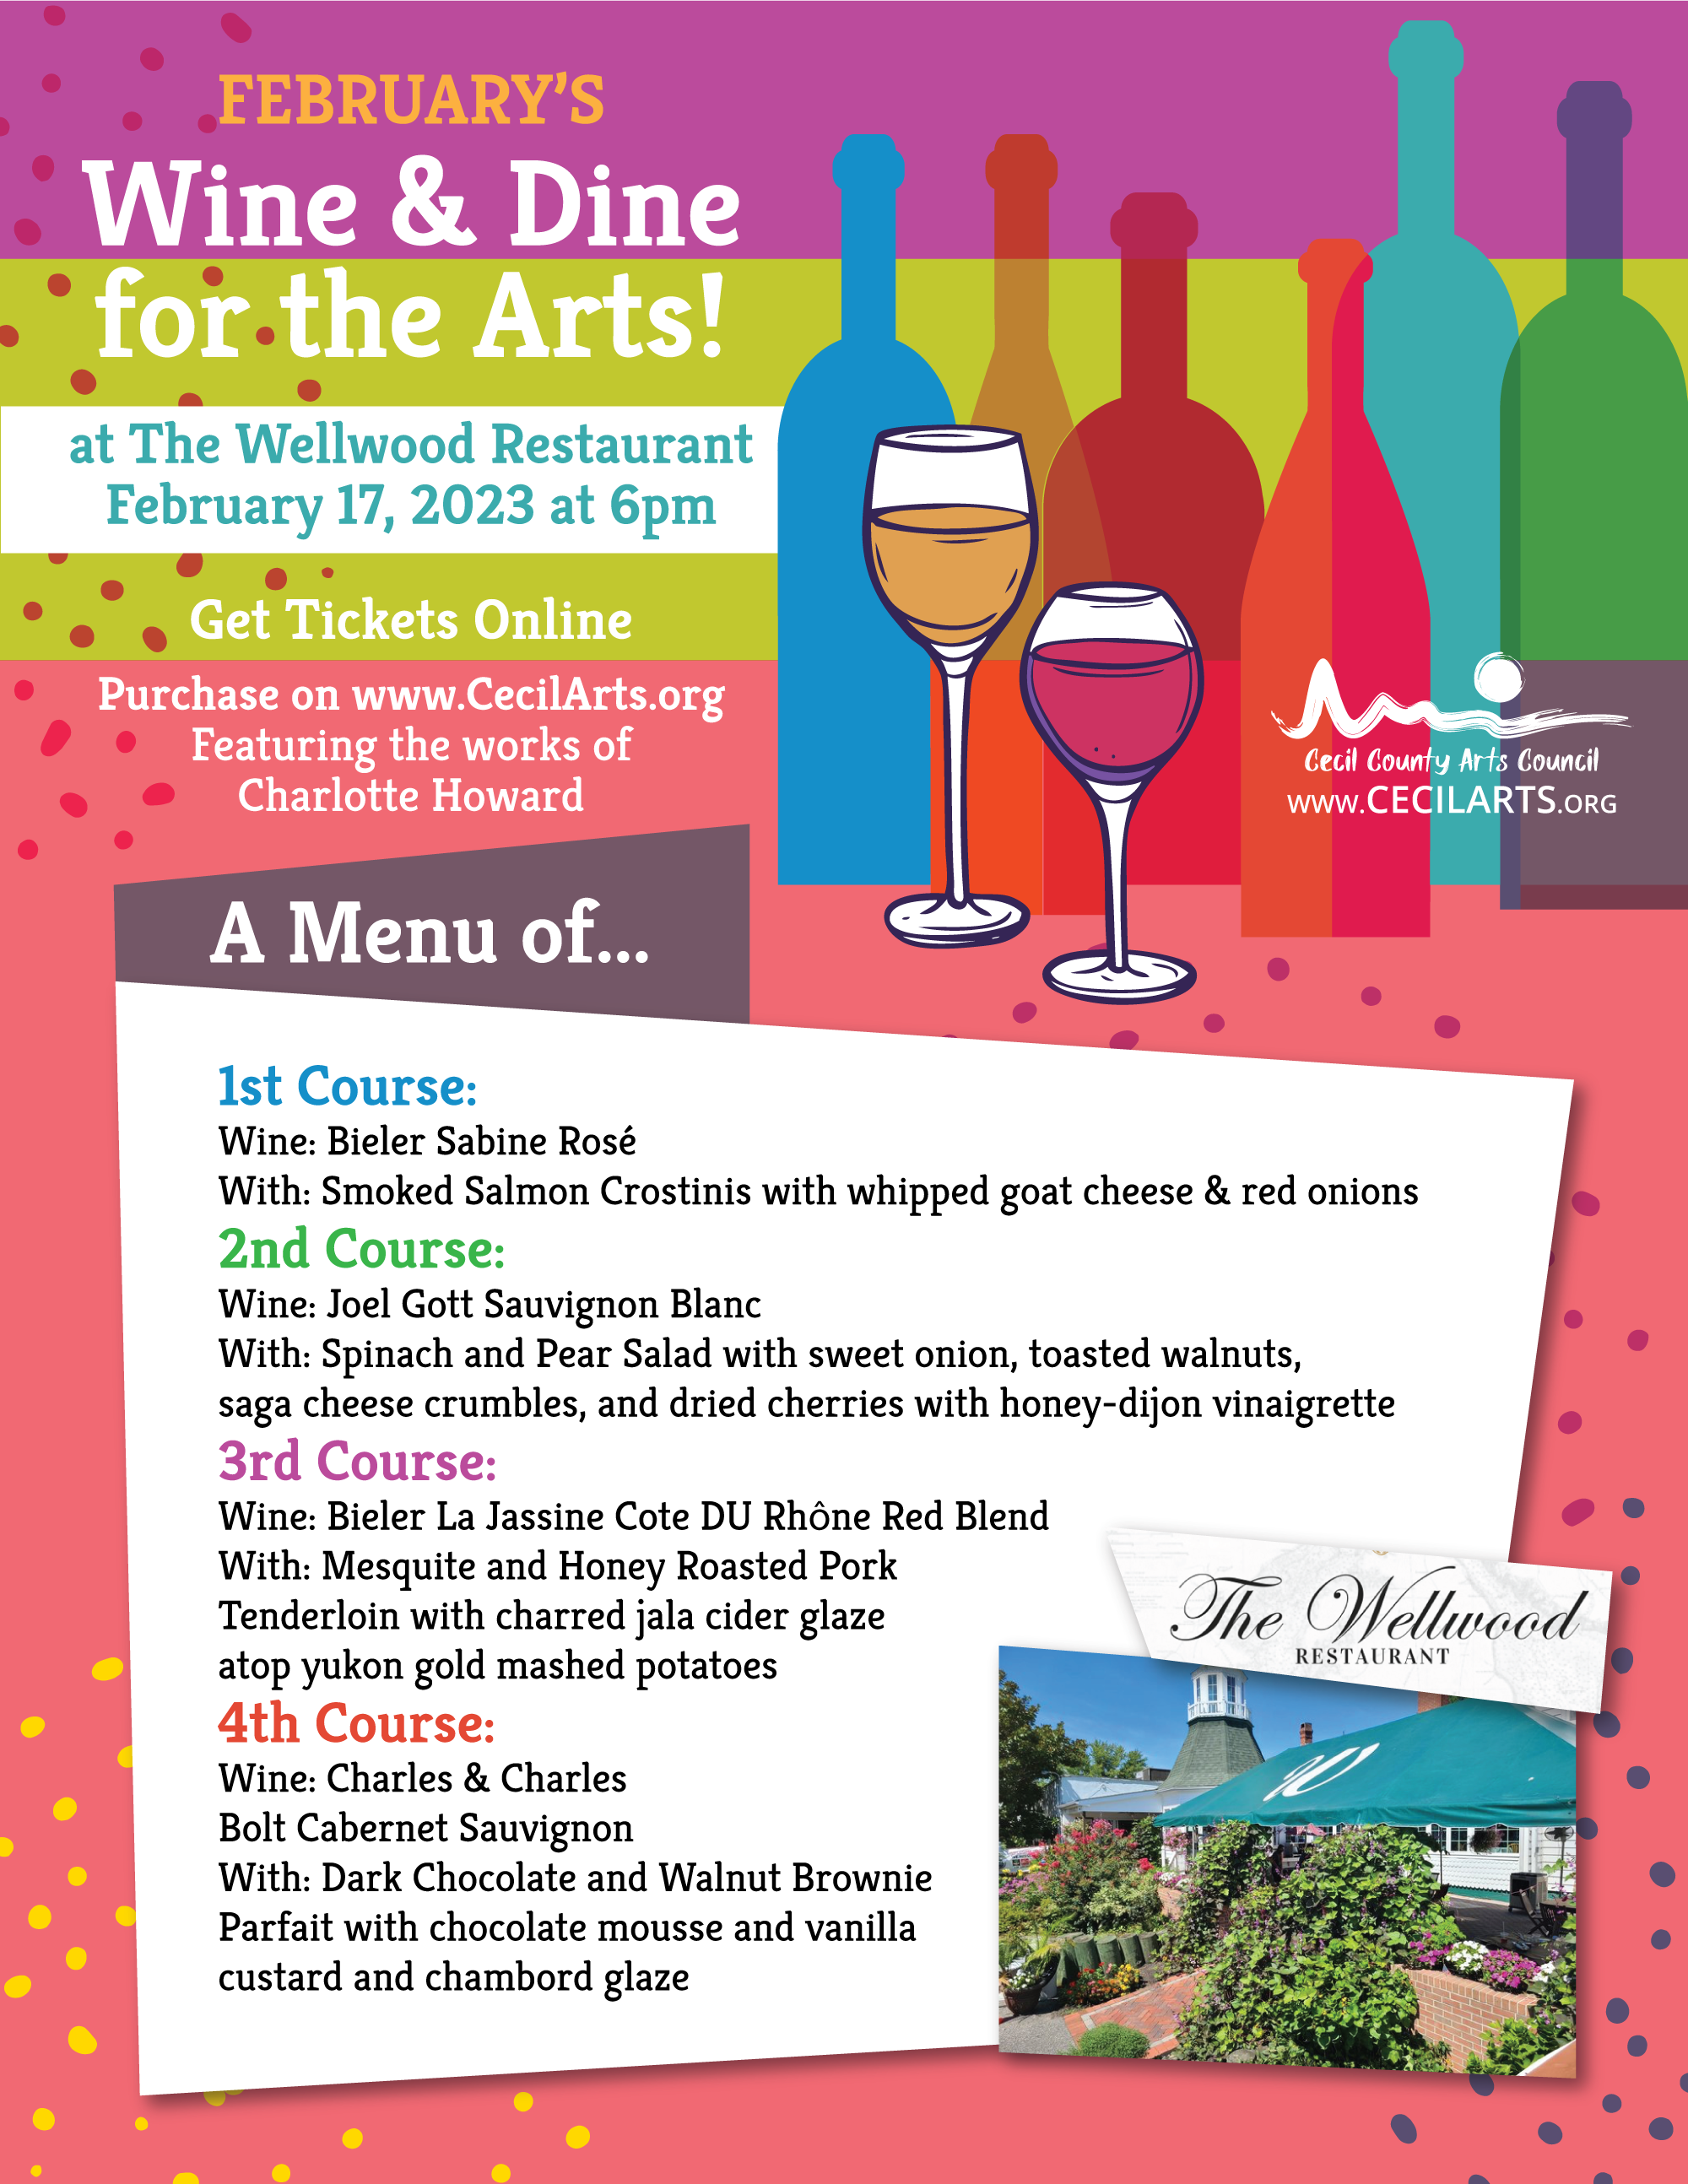 February's Wine & Dine for the Arts